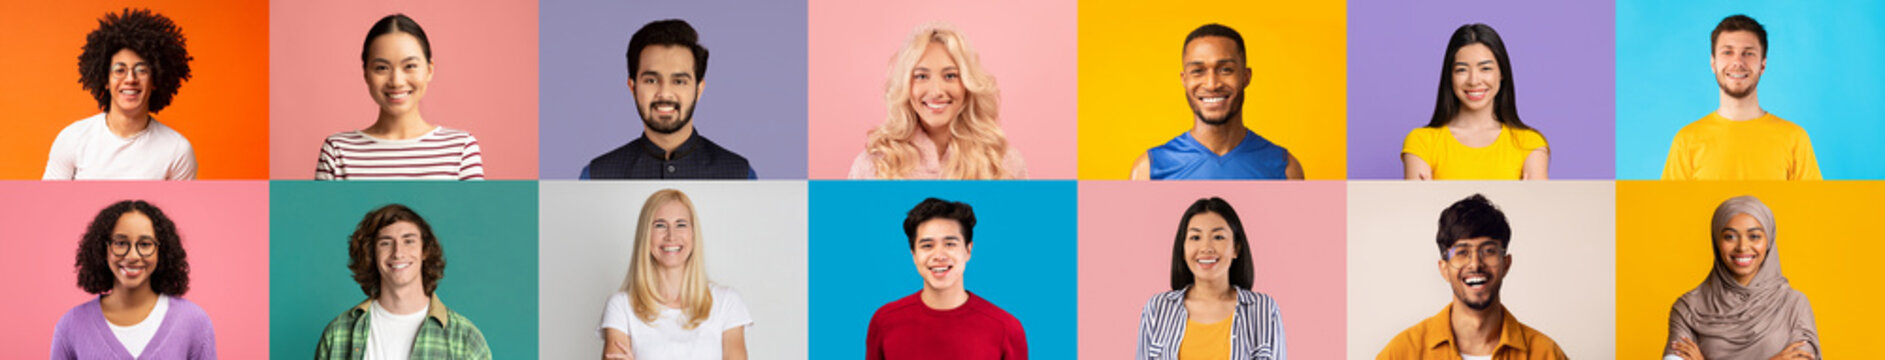 Collage of diverse ethnicity young people, group headshots